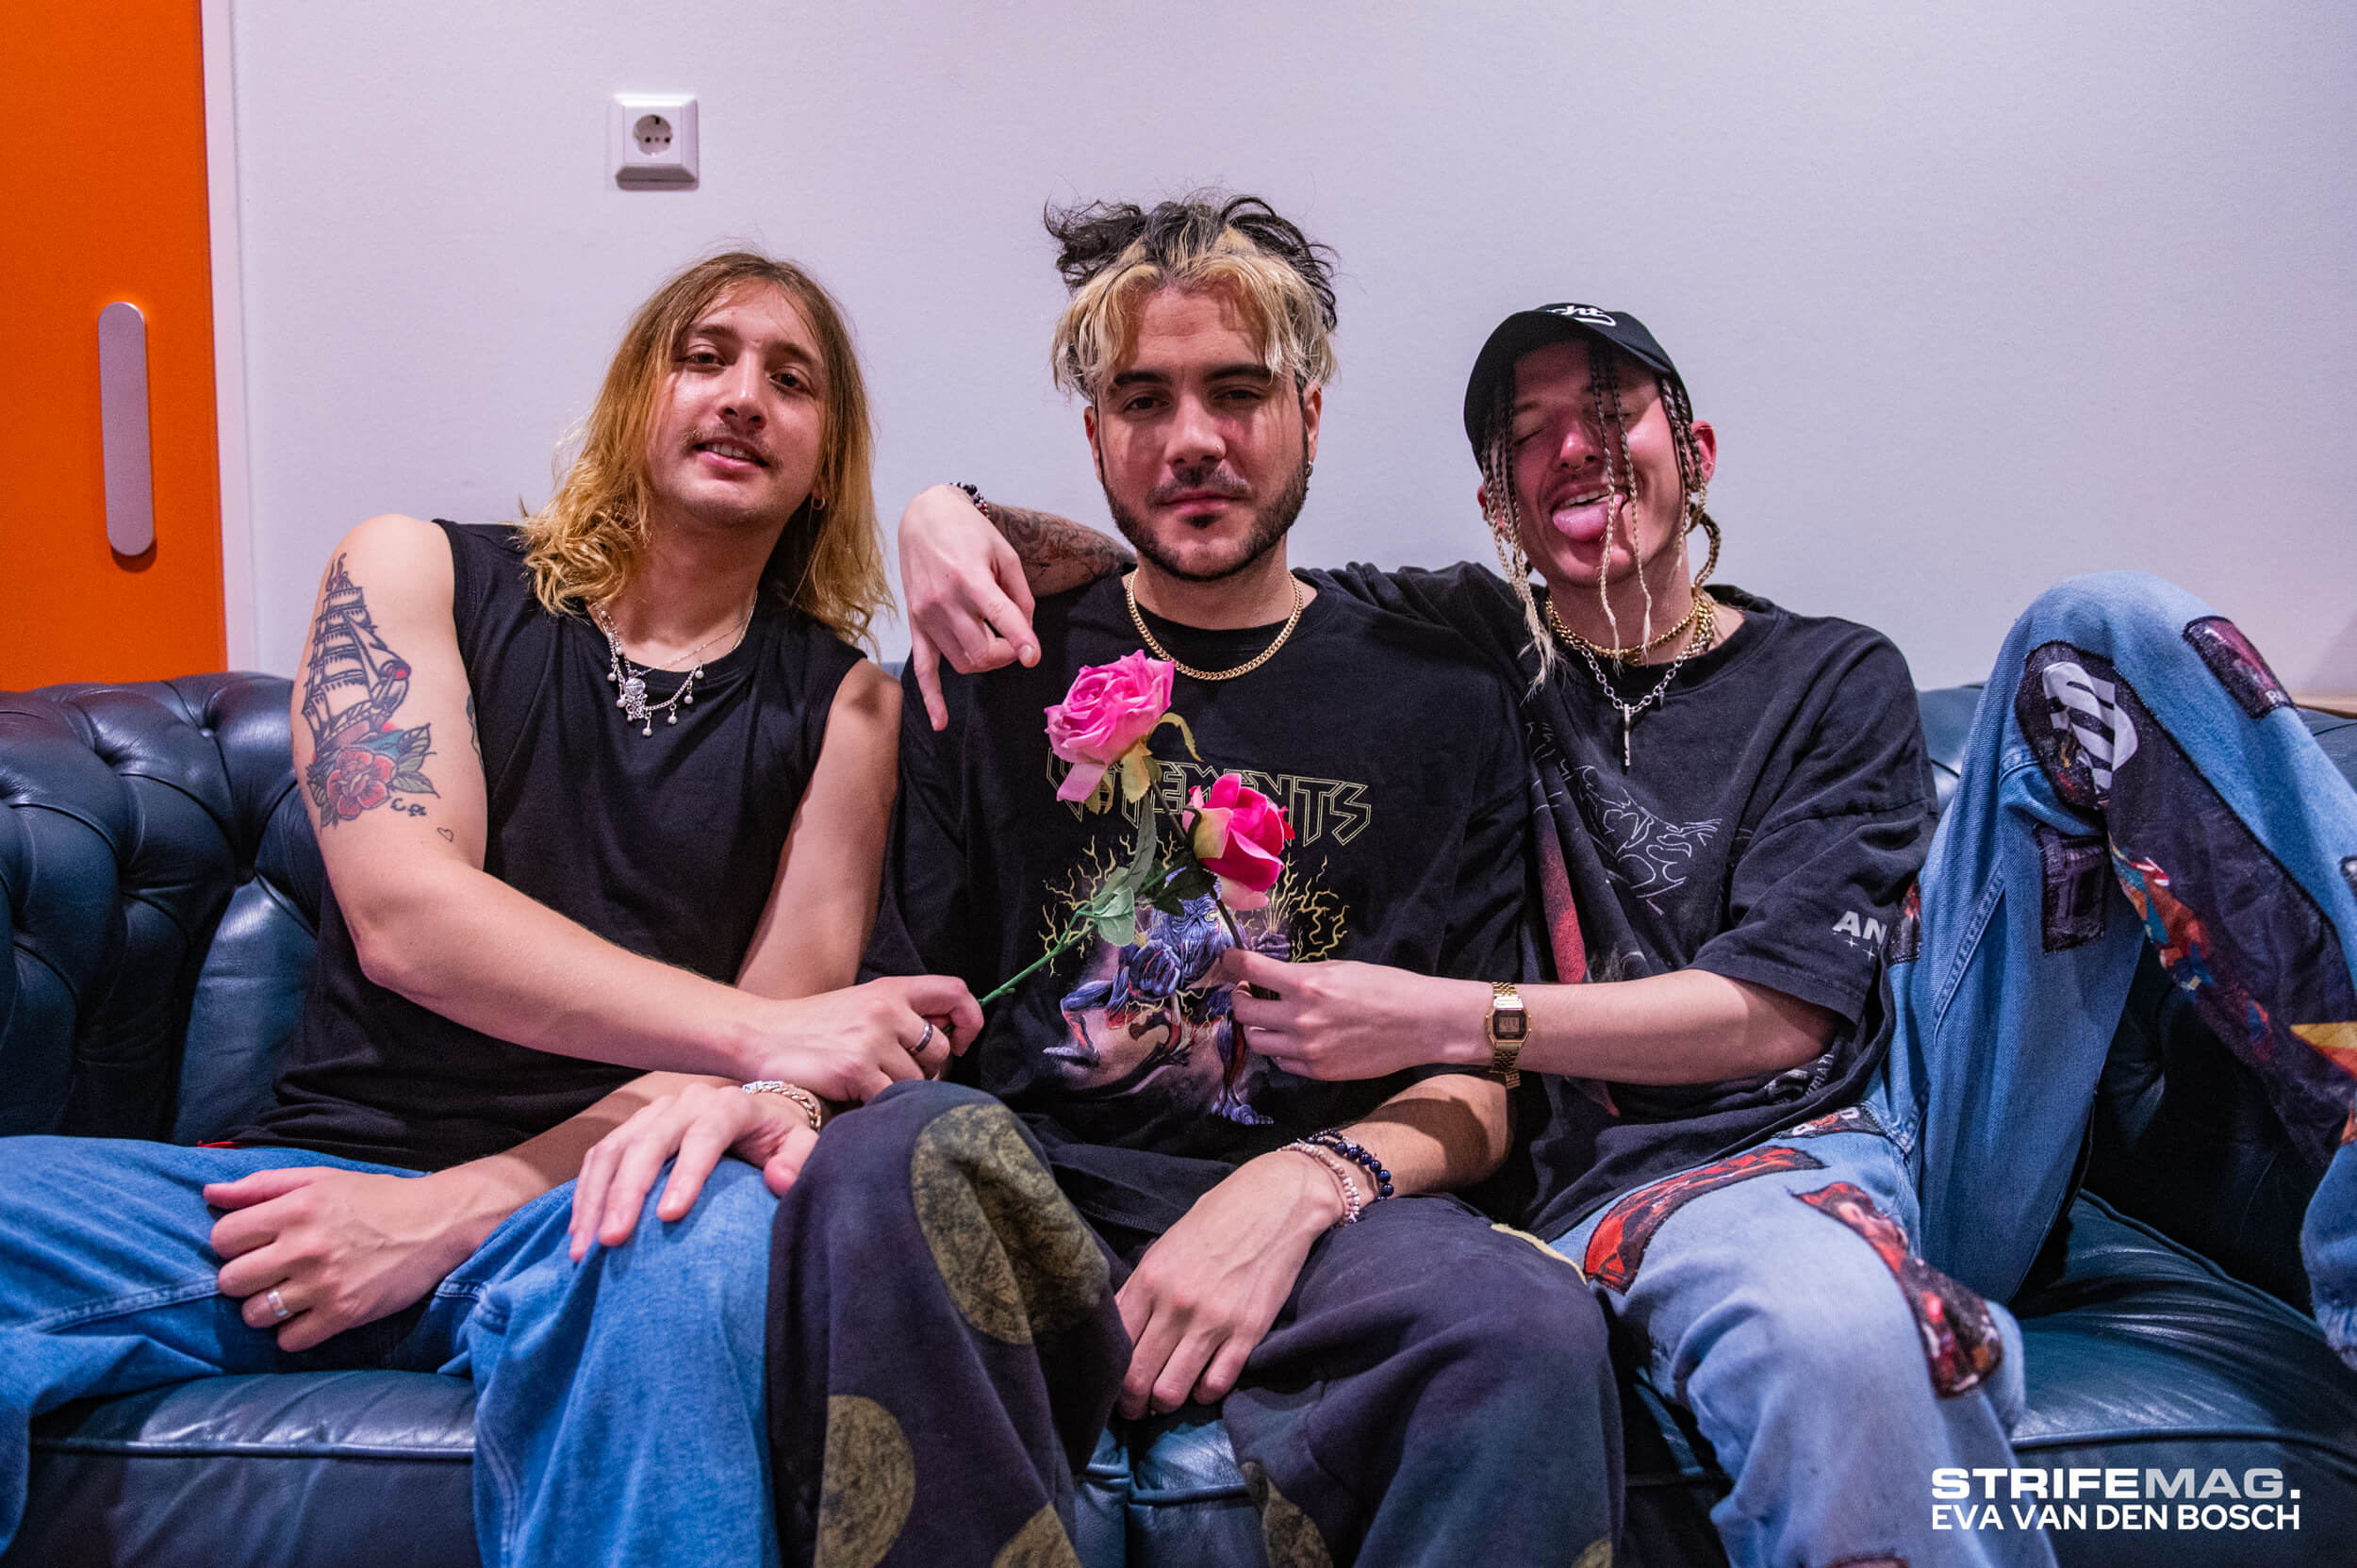 Especial Chase Atlantic x The Weeknd, FANDOMS PARTY